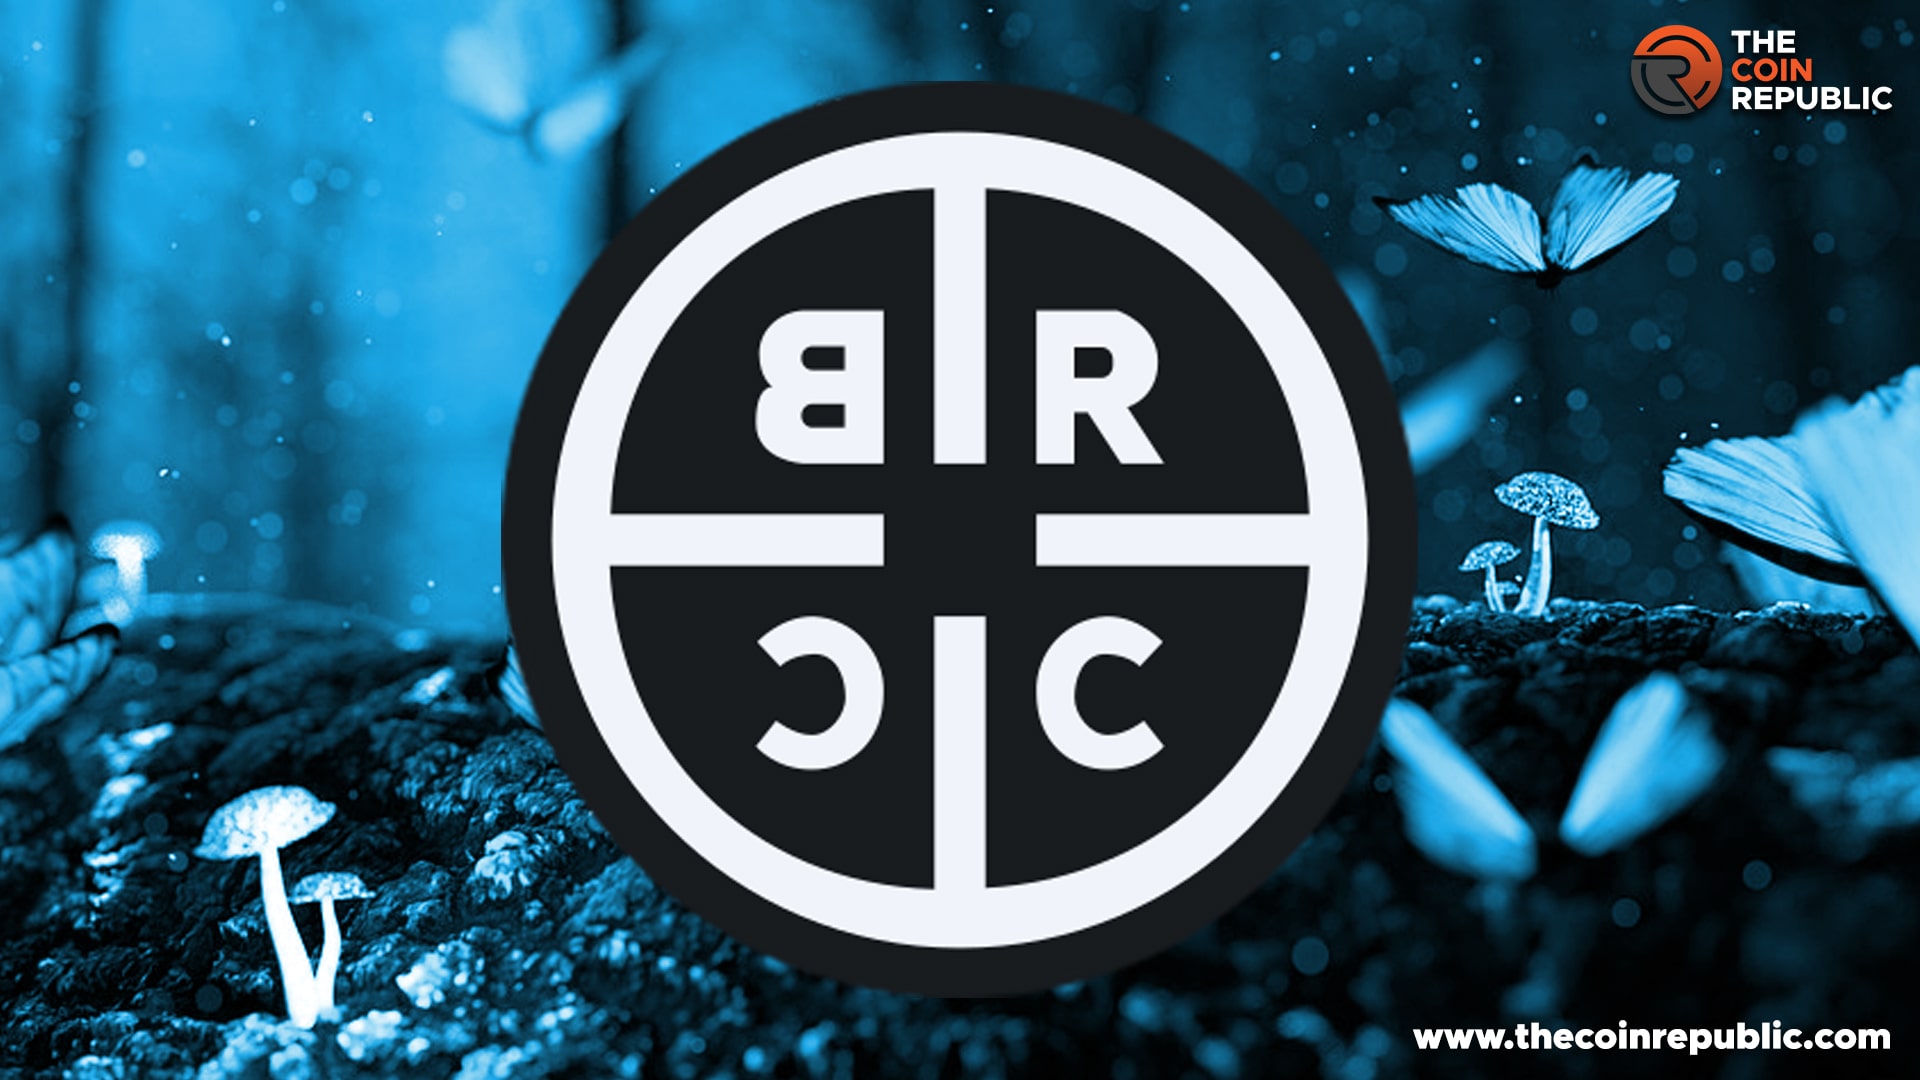 Is BRCC Stock Price Looking For A New Low?